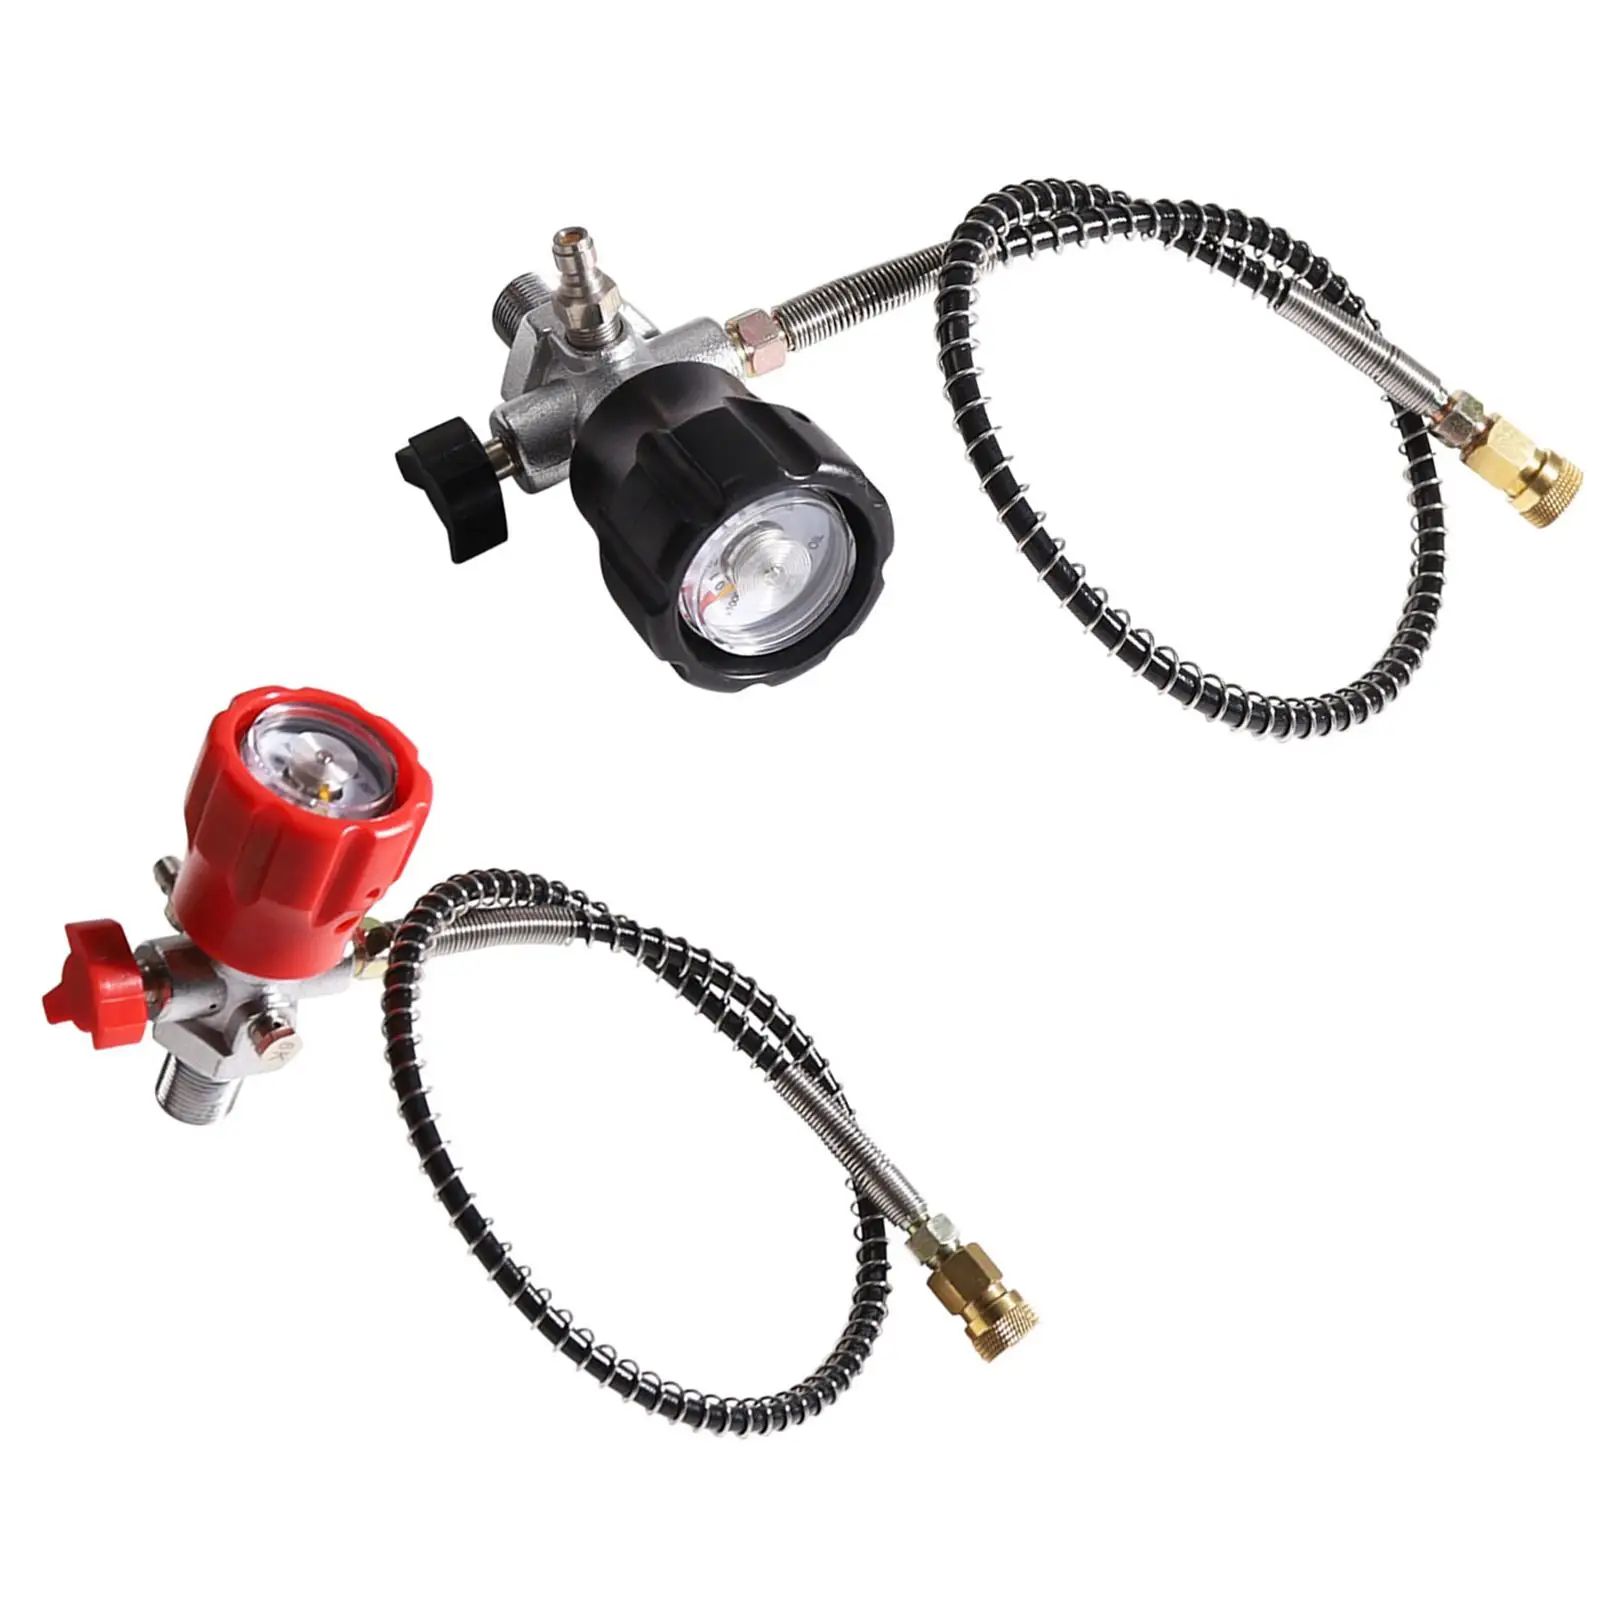 High Pressure Fill Station Charging Adapter with 24inch Hose Tube Pipe Connection Tank Refill Adapter for Scuba Diving Tank